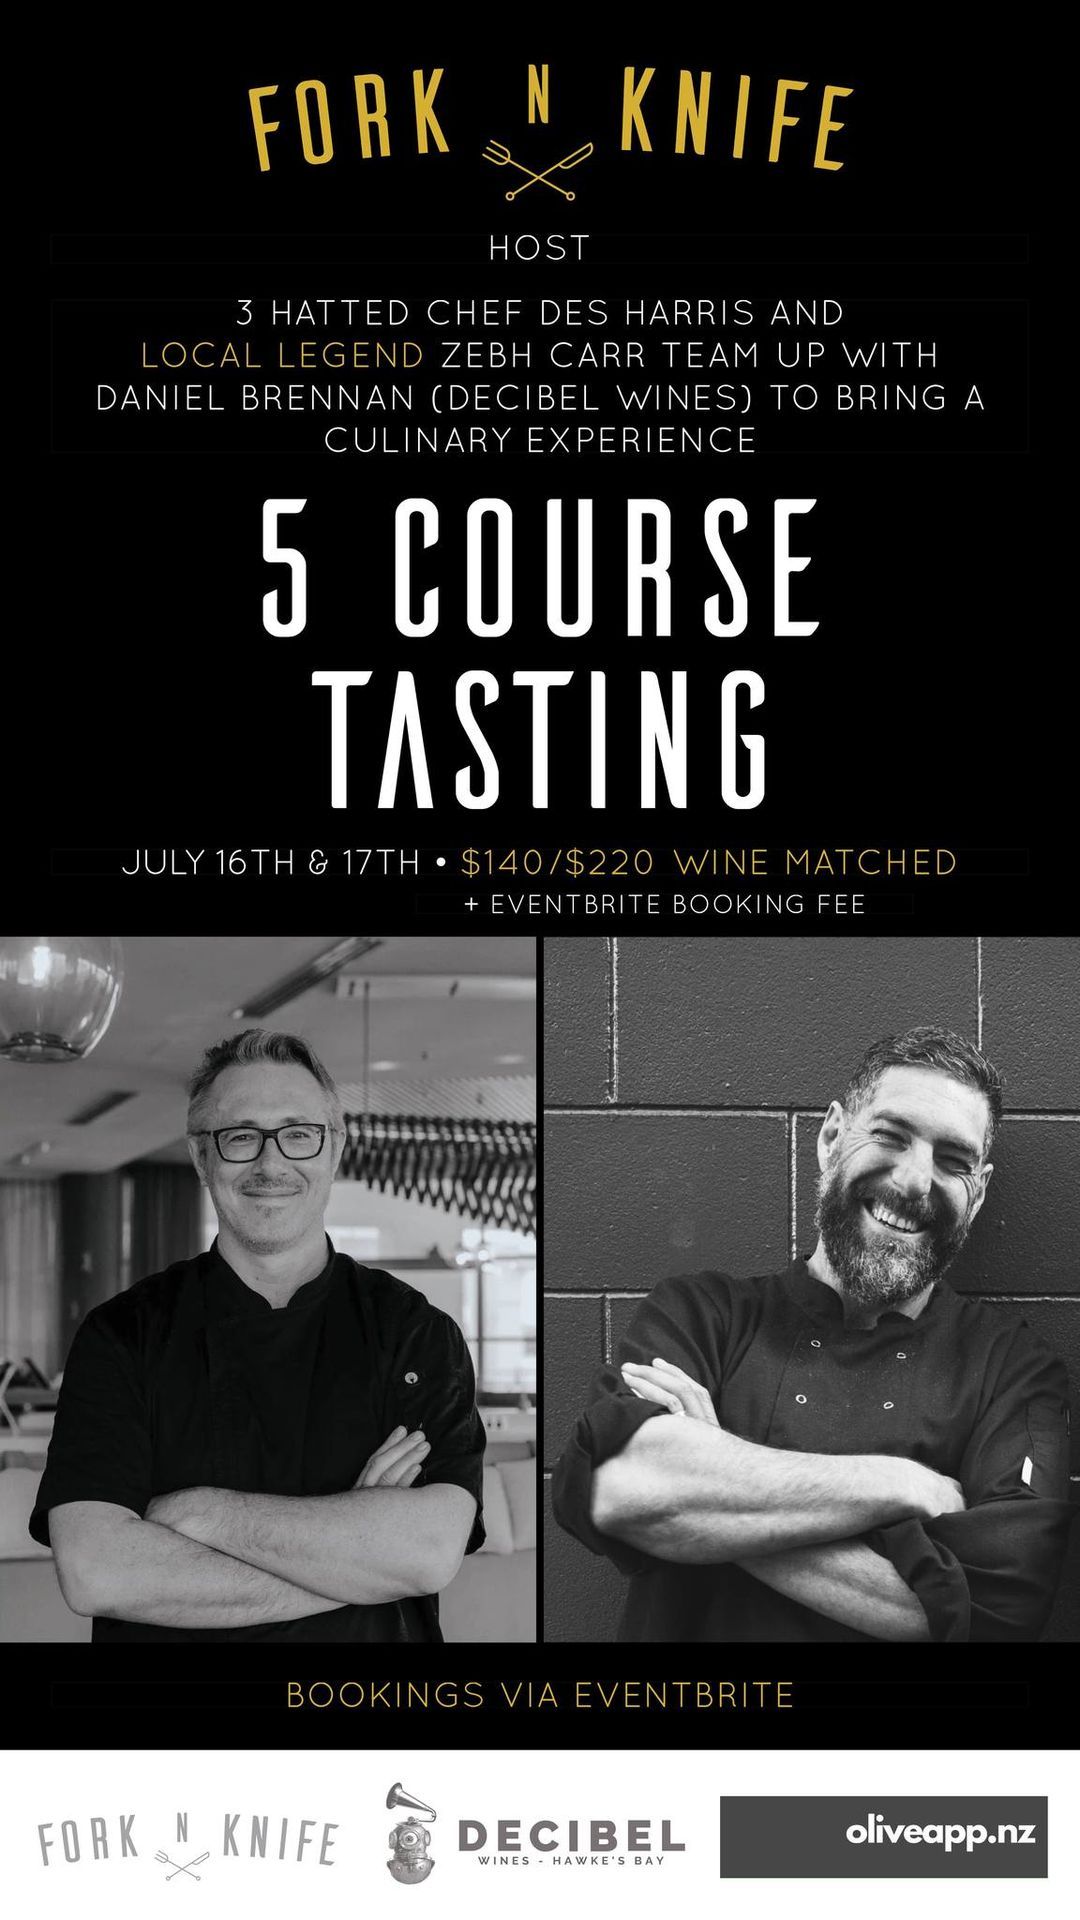 5 Course tasting with Des Harris and Zebh Carr